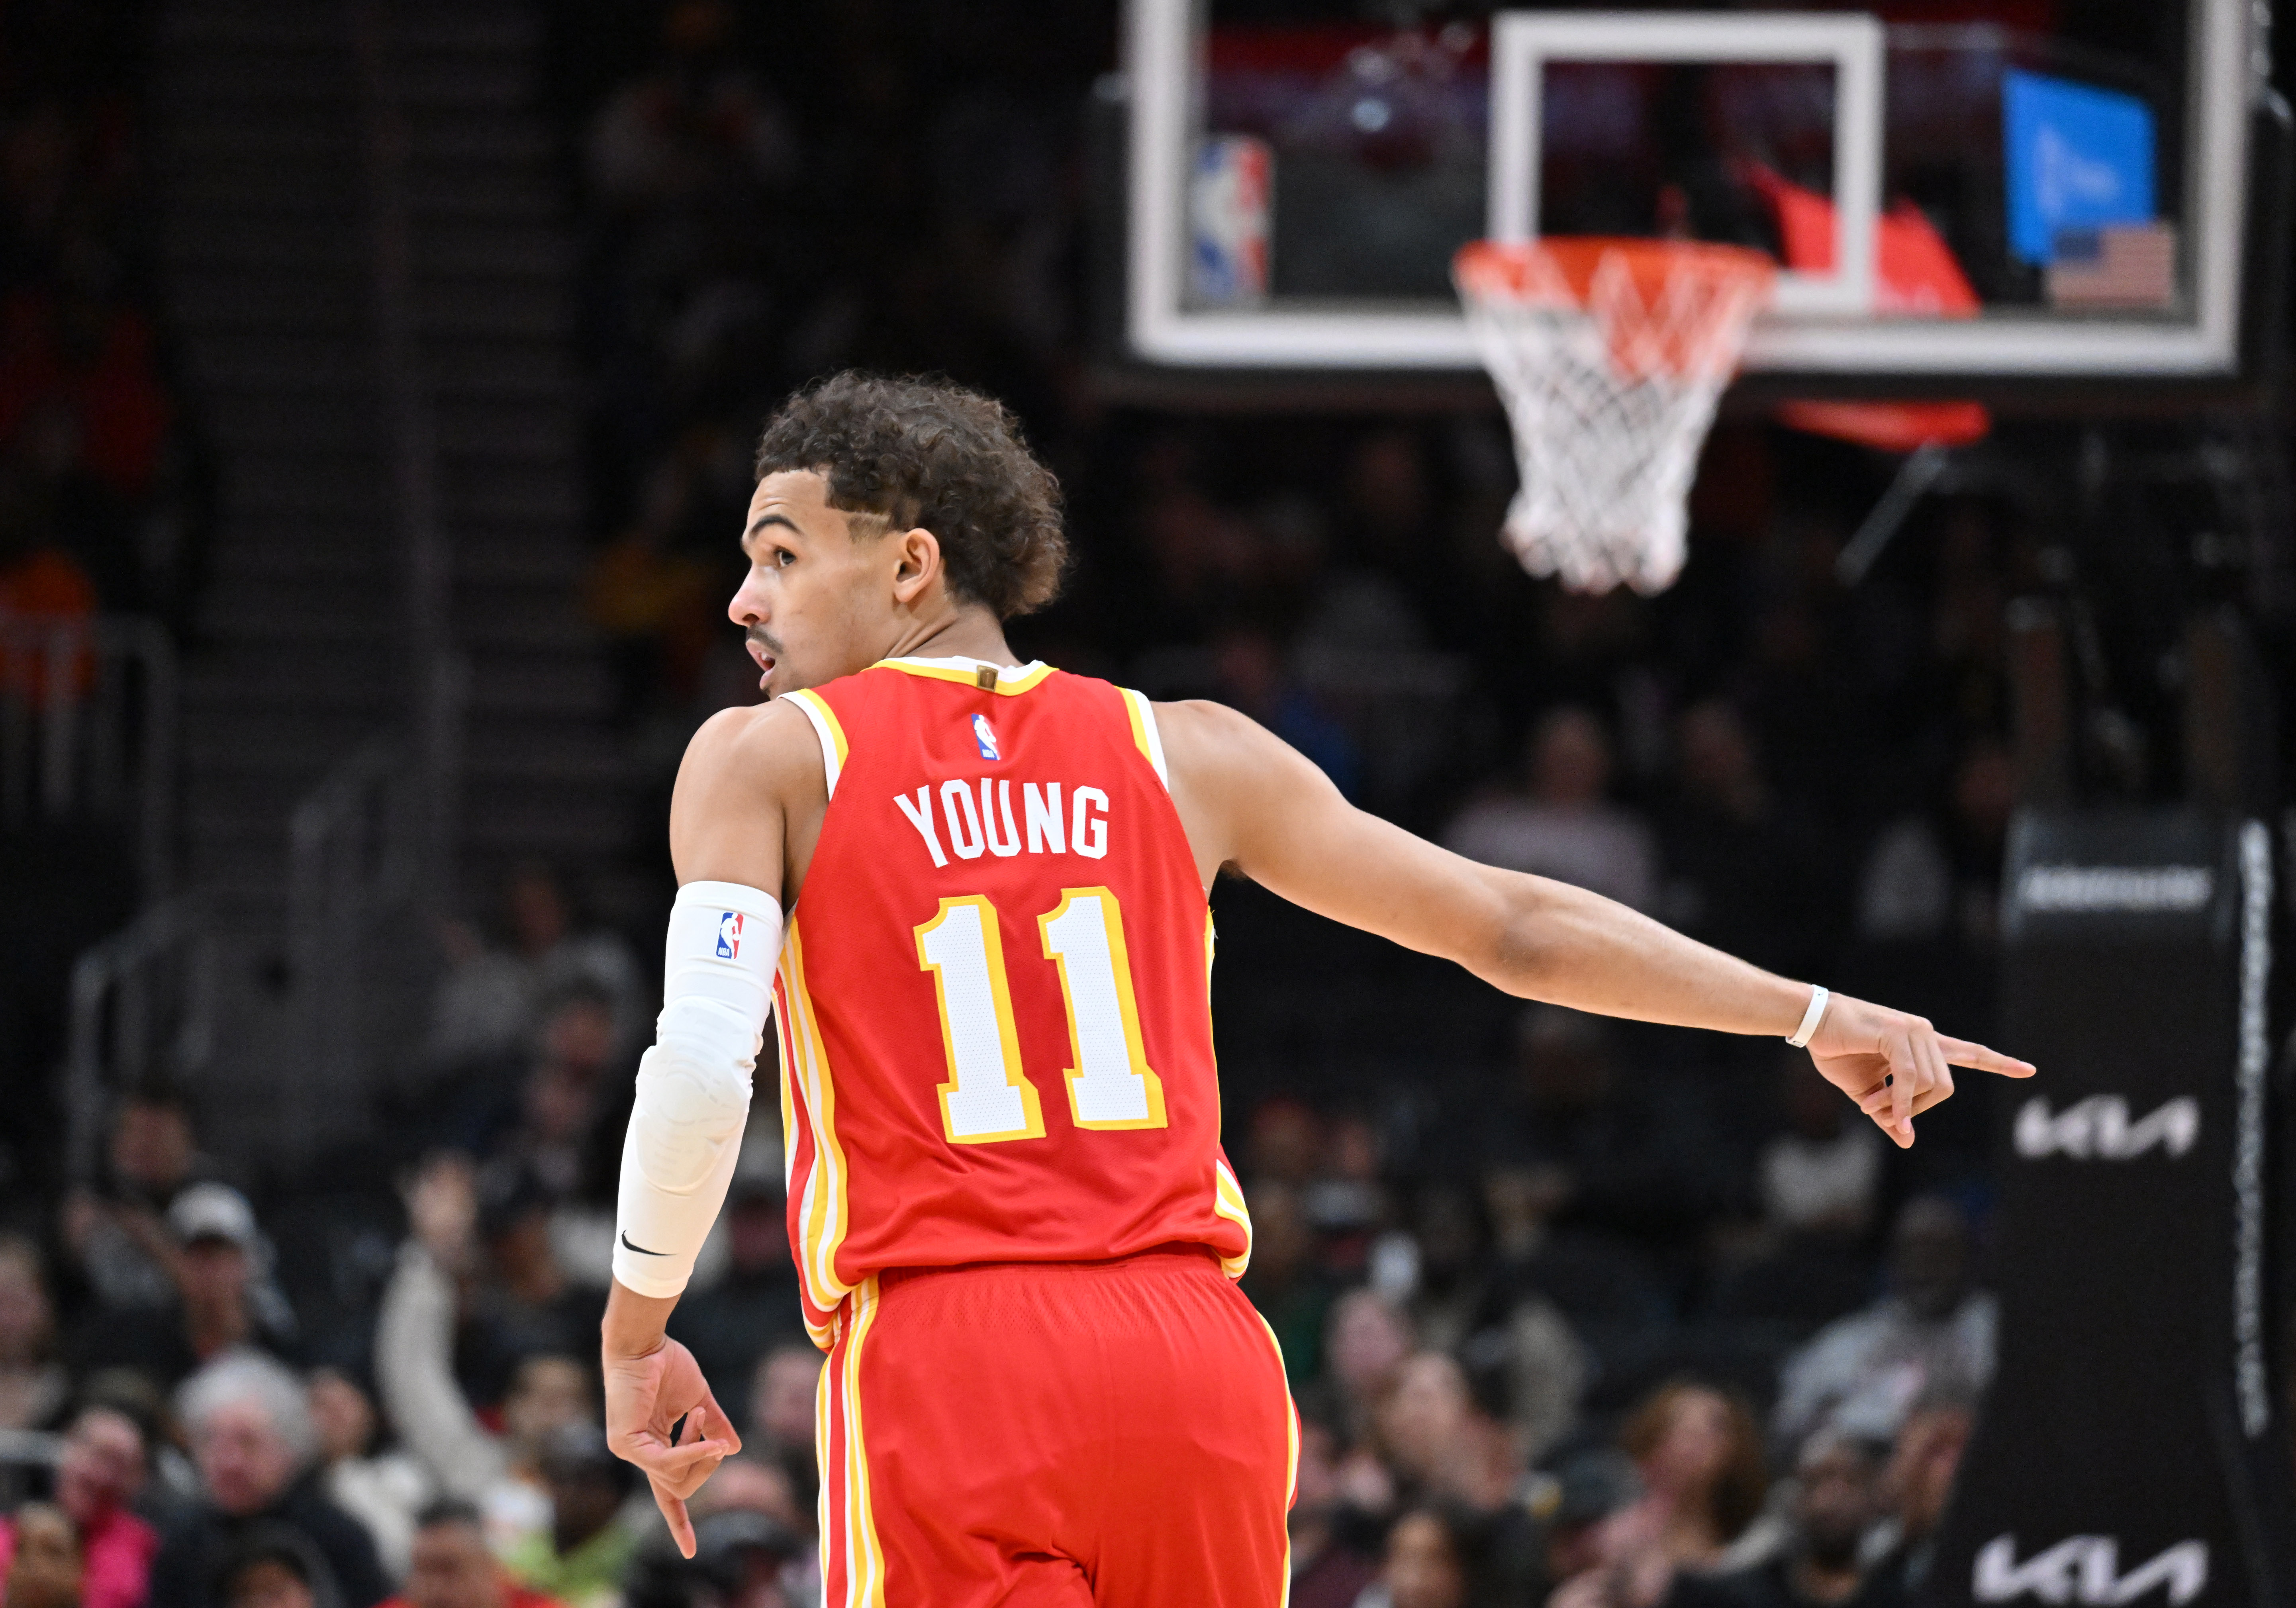 Trae Young notches double-double in NBA All-Star debut - Peachtree Hoops